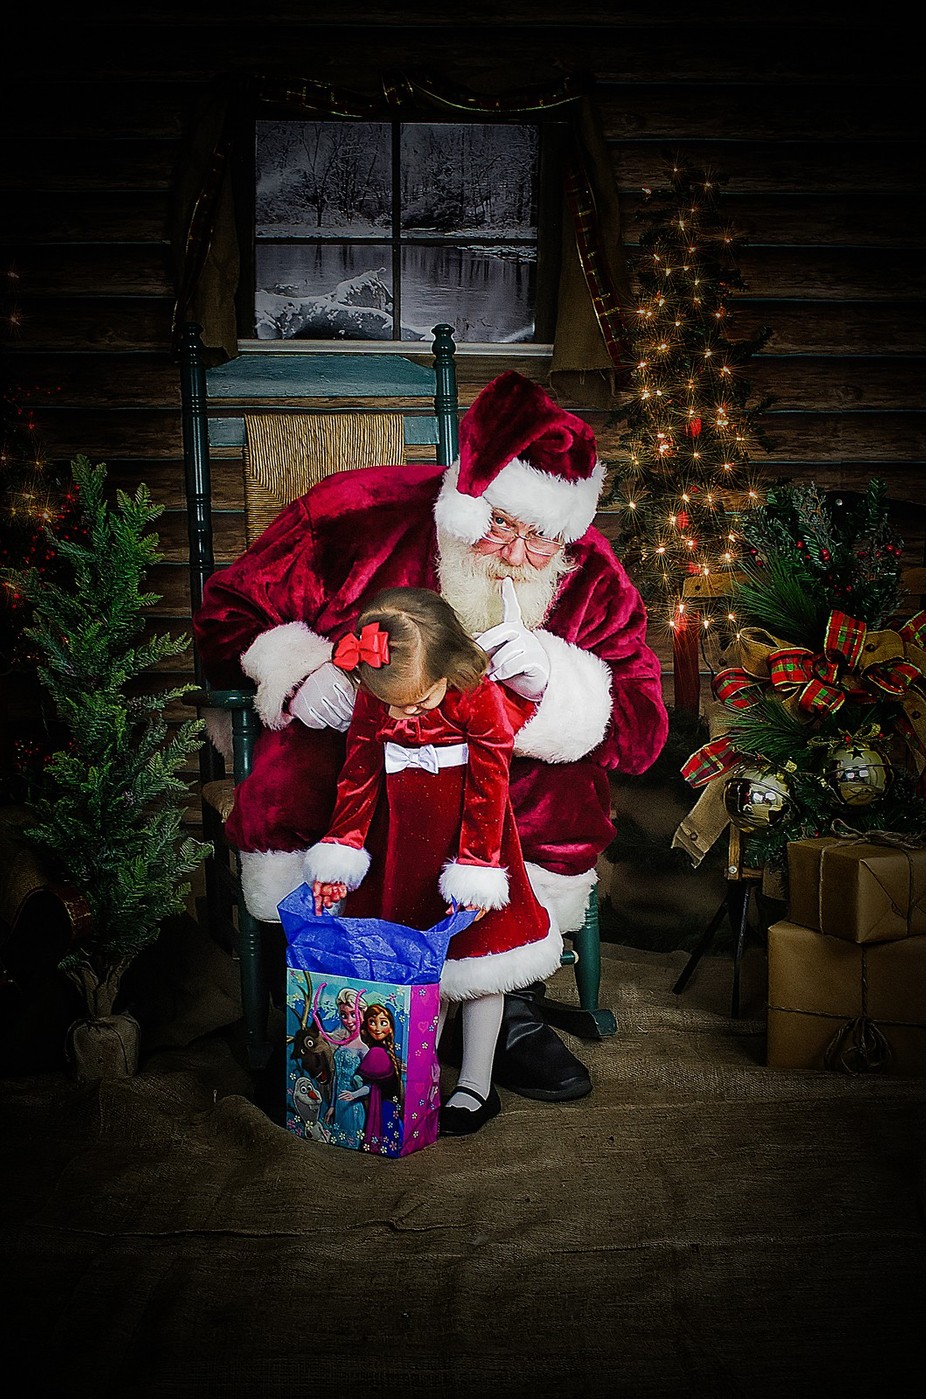 Santa Surprise by LizG - Everything Holiday Photo Contest